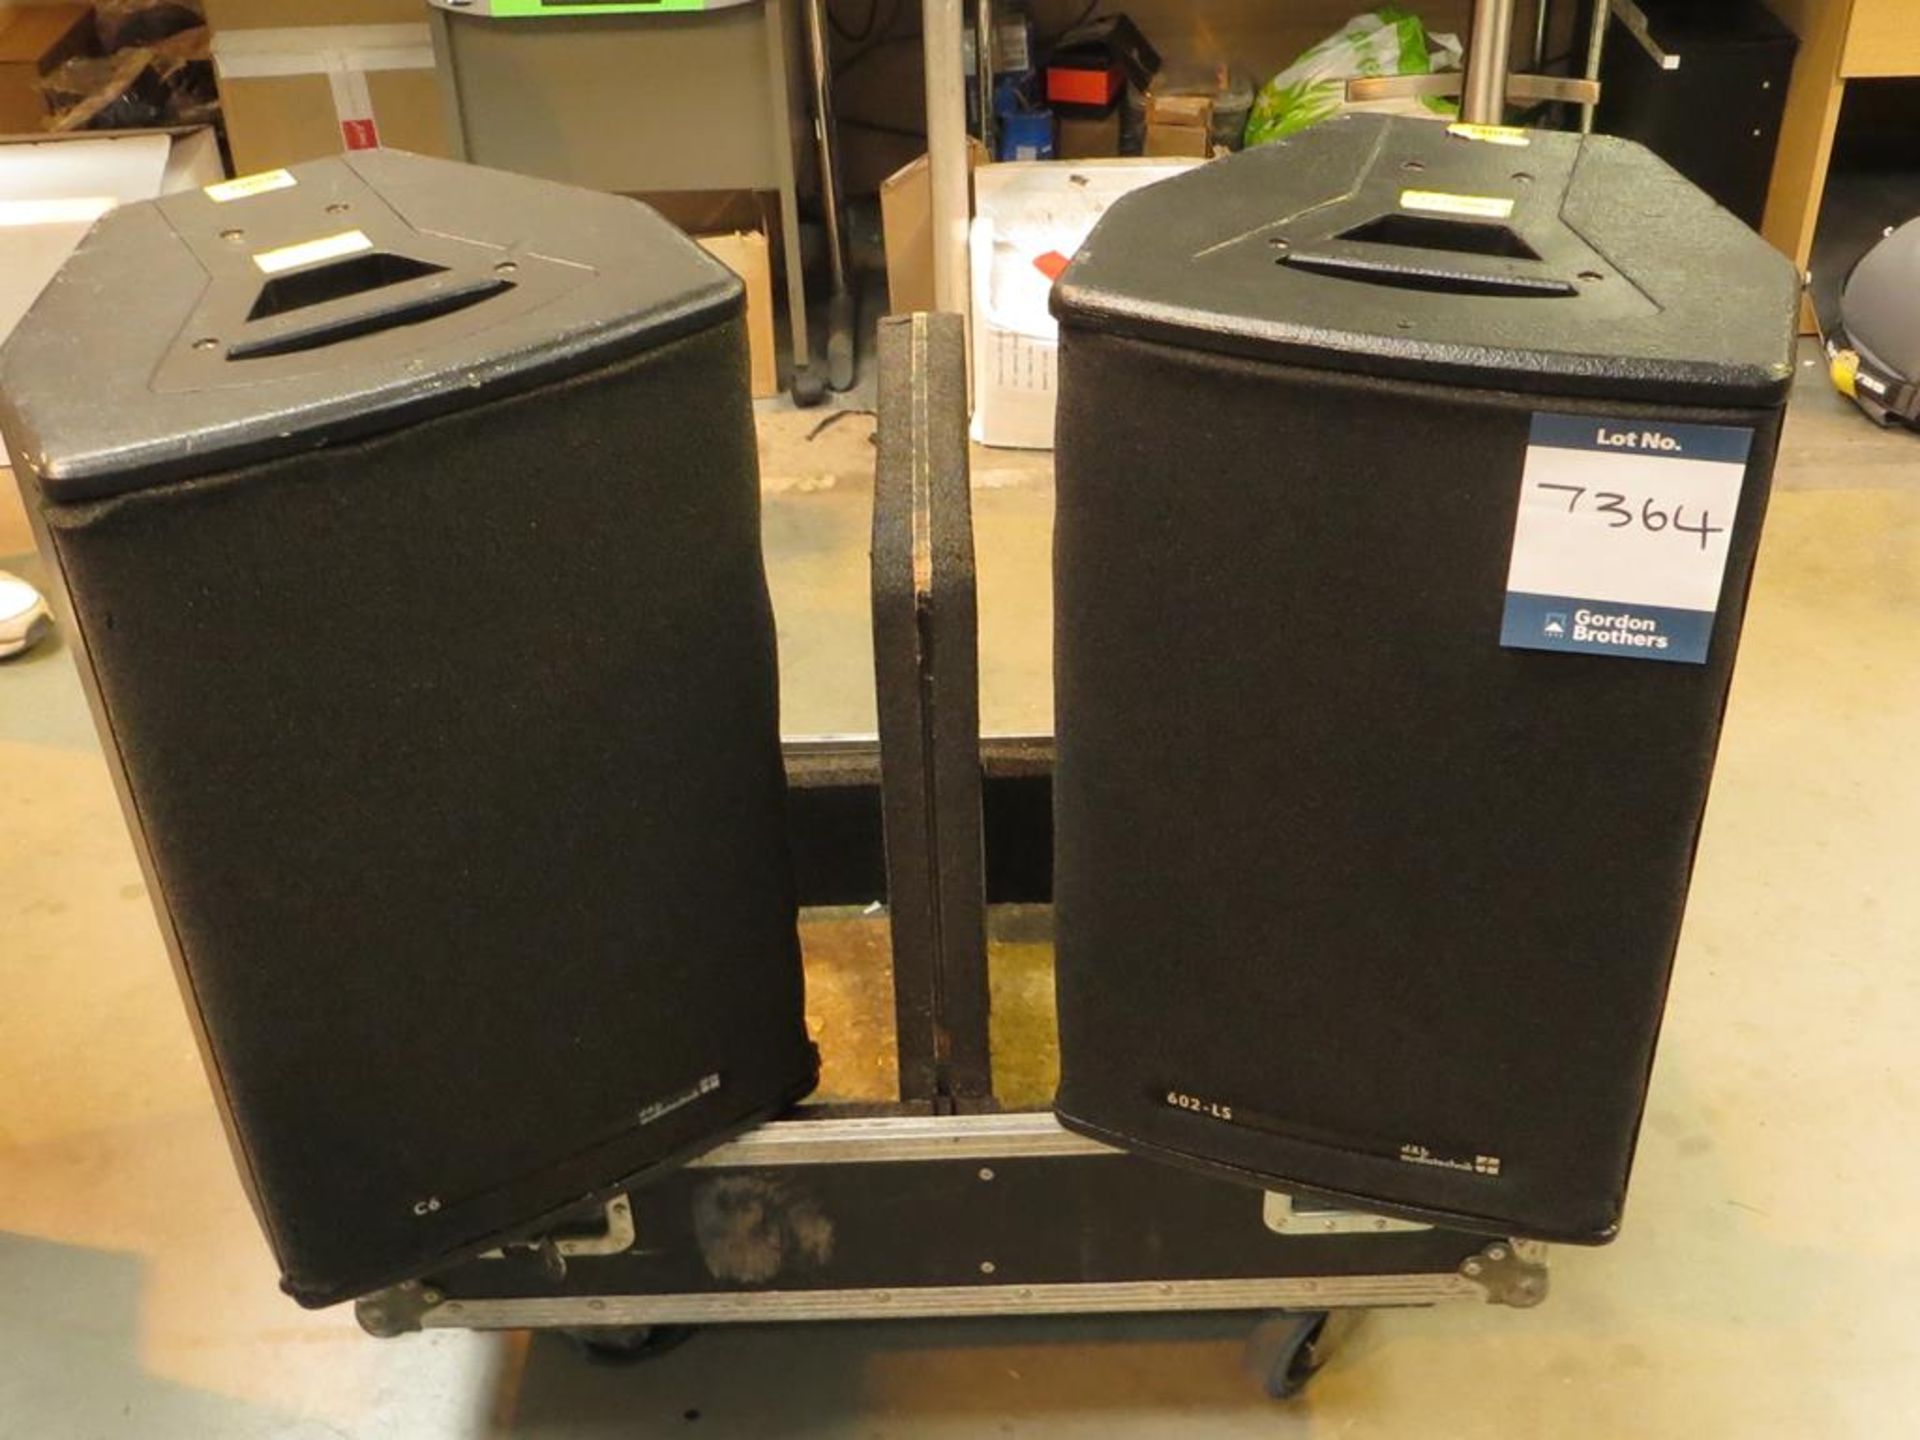 1x No. pair D&B Audiotechnik, C6 speakers with mounting brackets in transit case (can't fly): Unit C